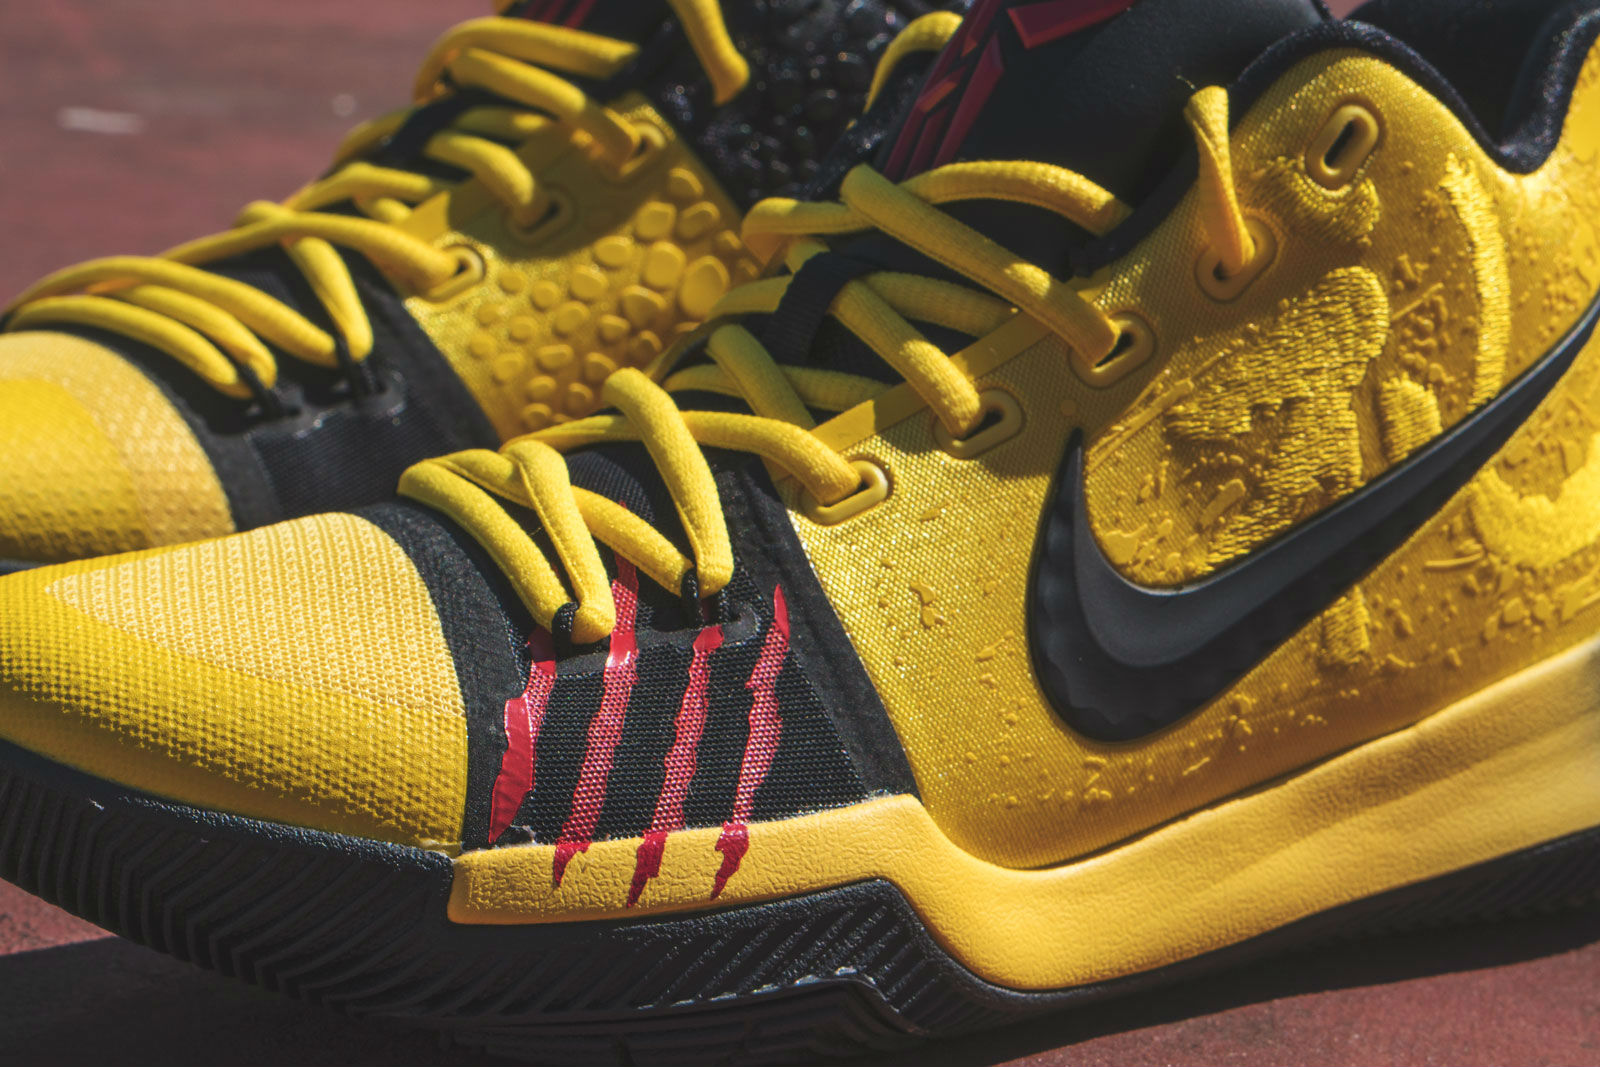 kyrie 3 bruce lee red